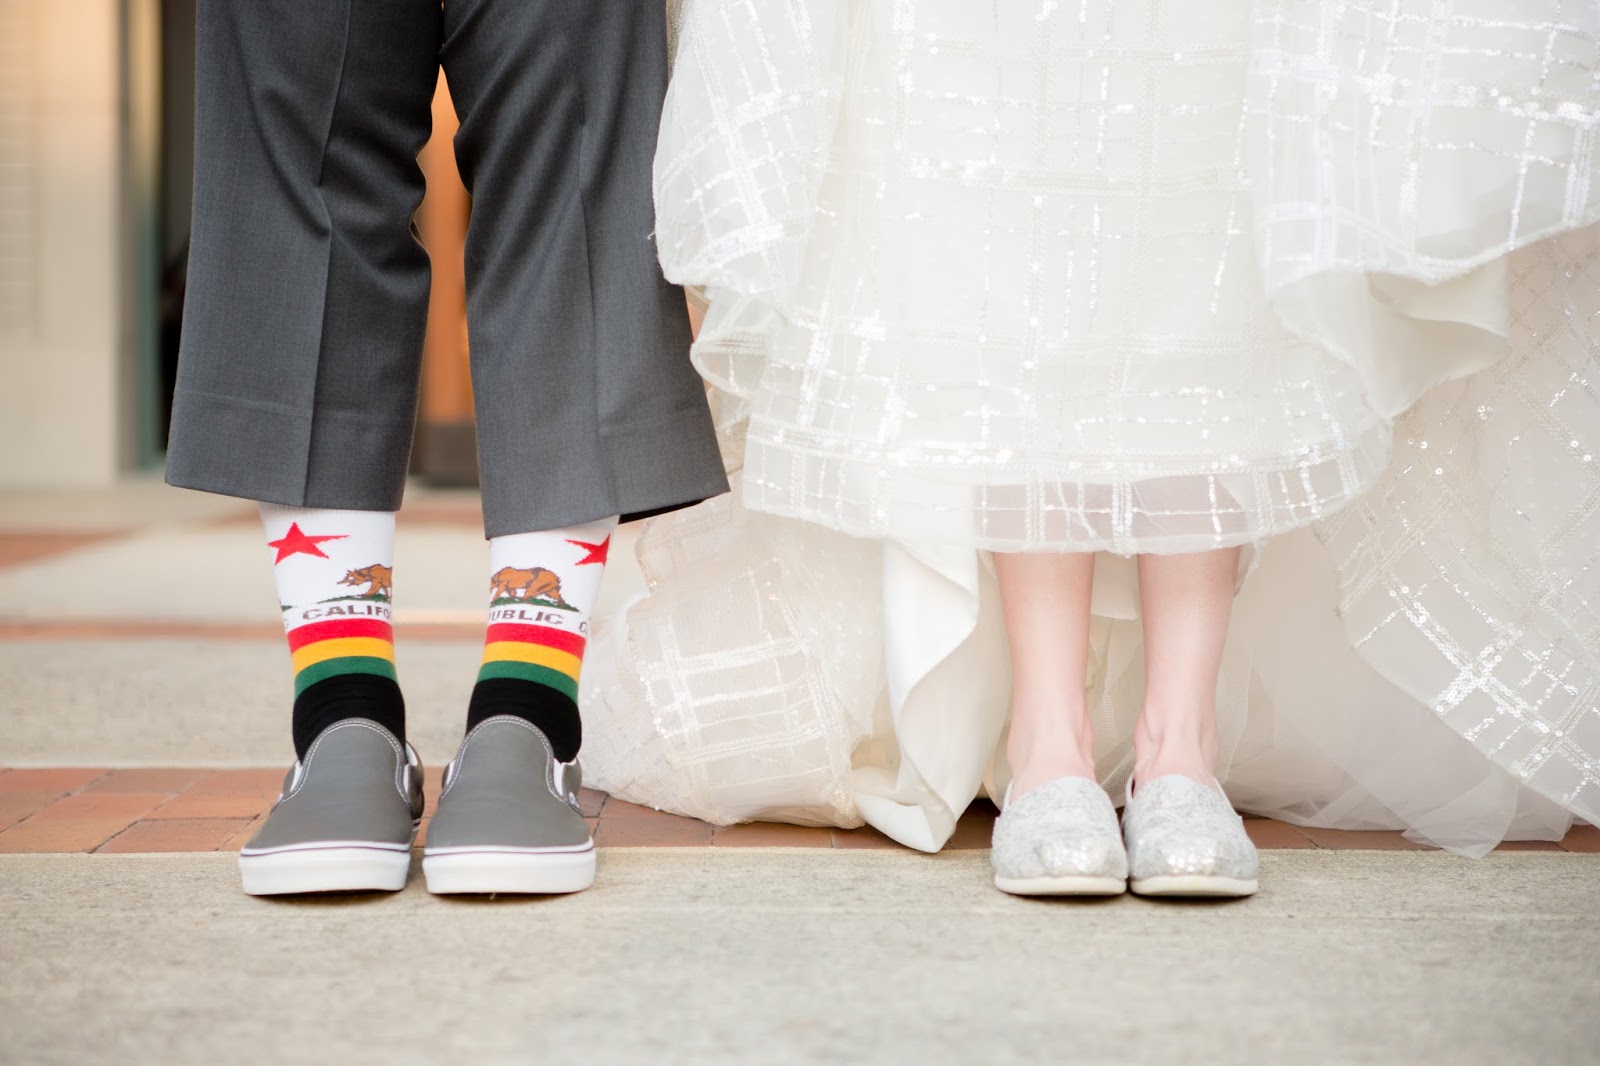 Groom and Bride Shoes